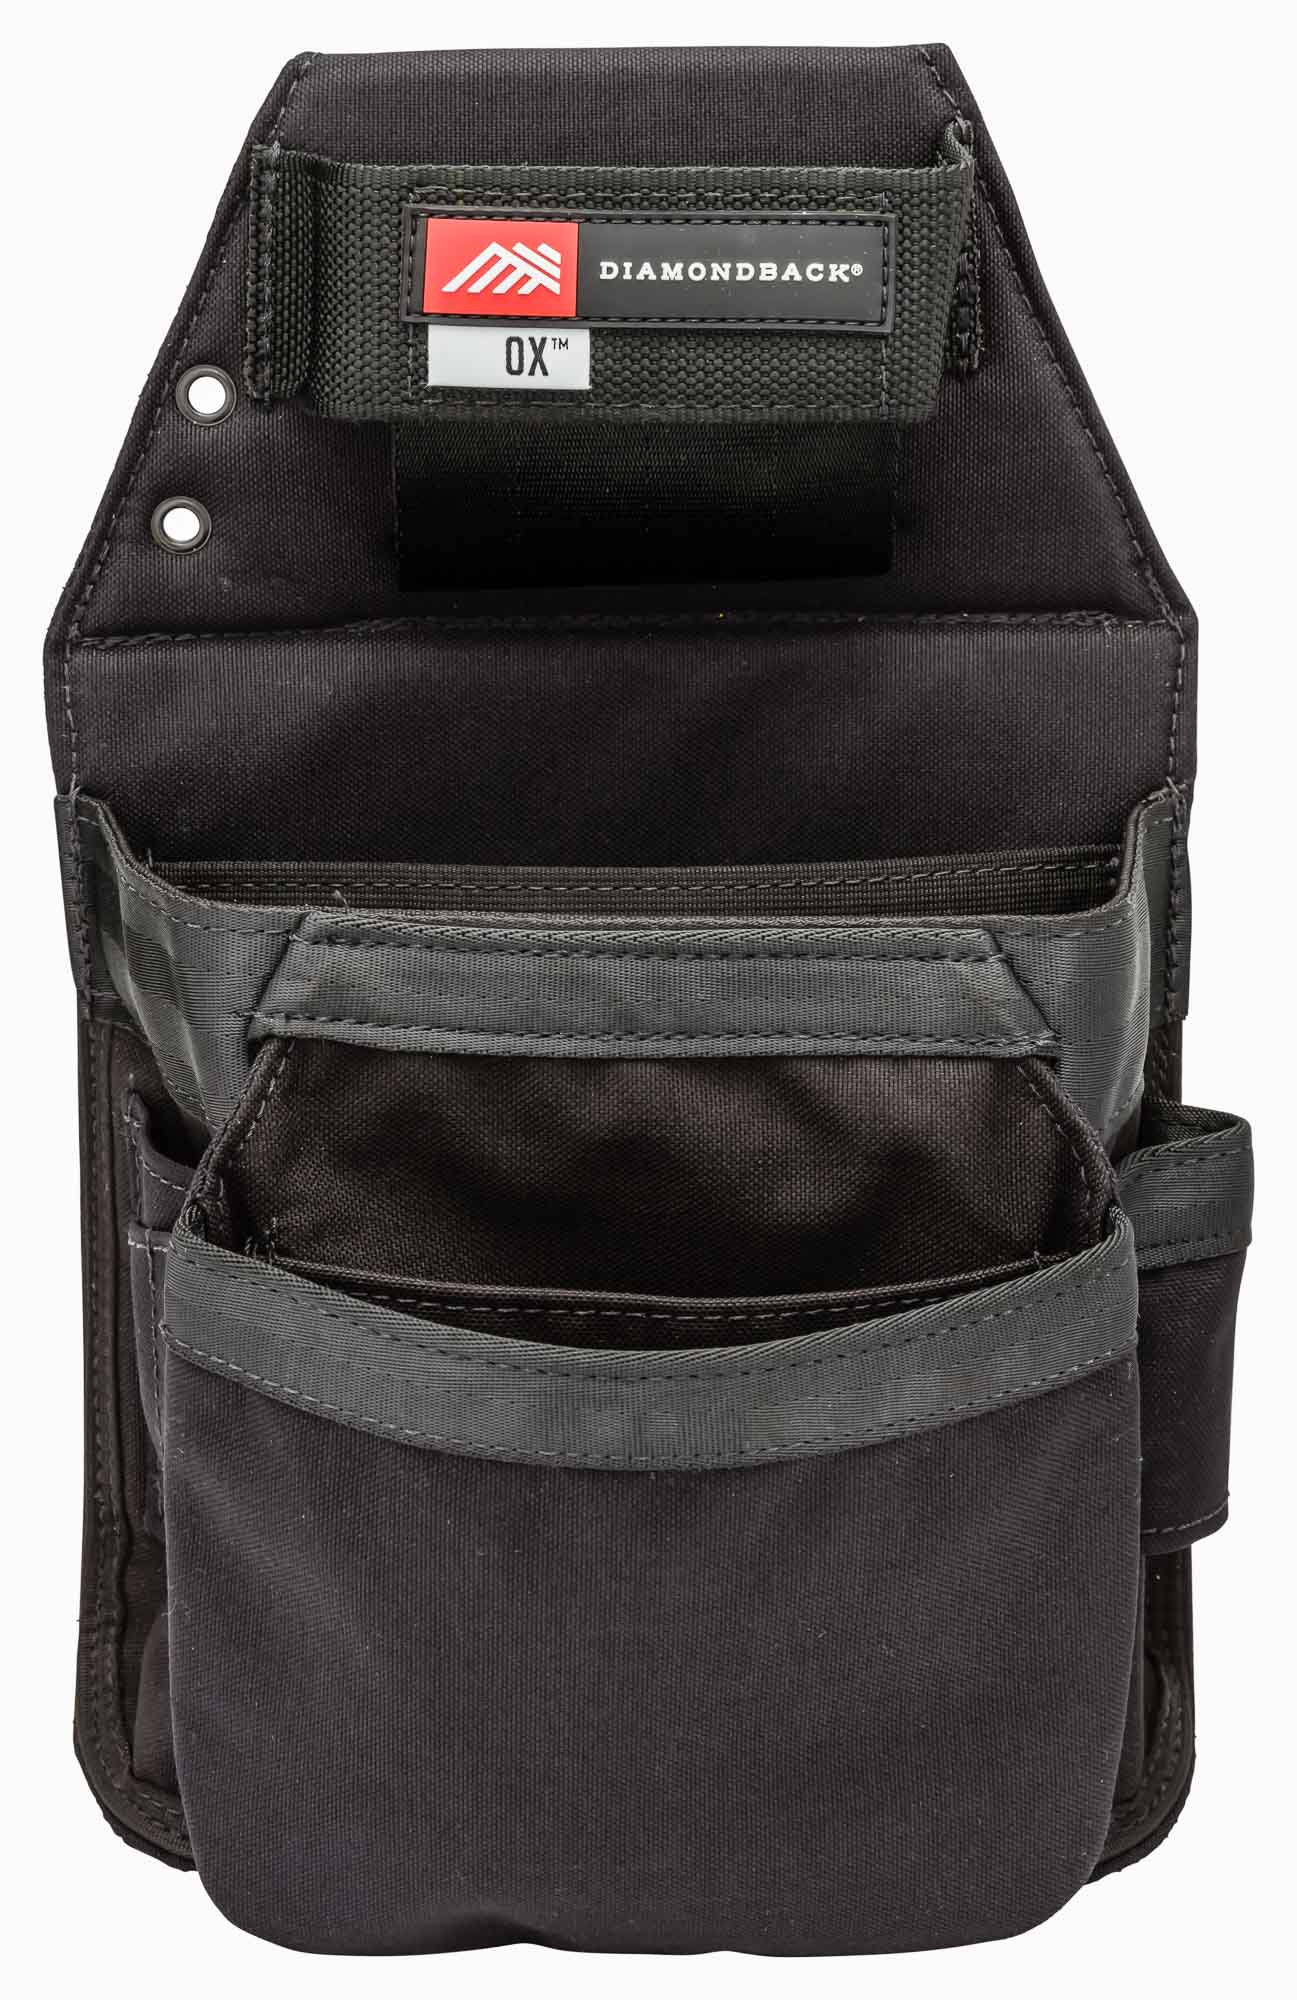 Ox 2-Pocket 3-Slot Tool Pouch